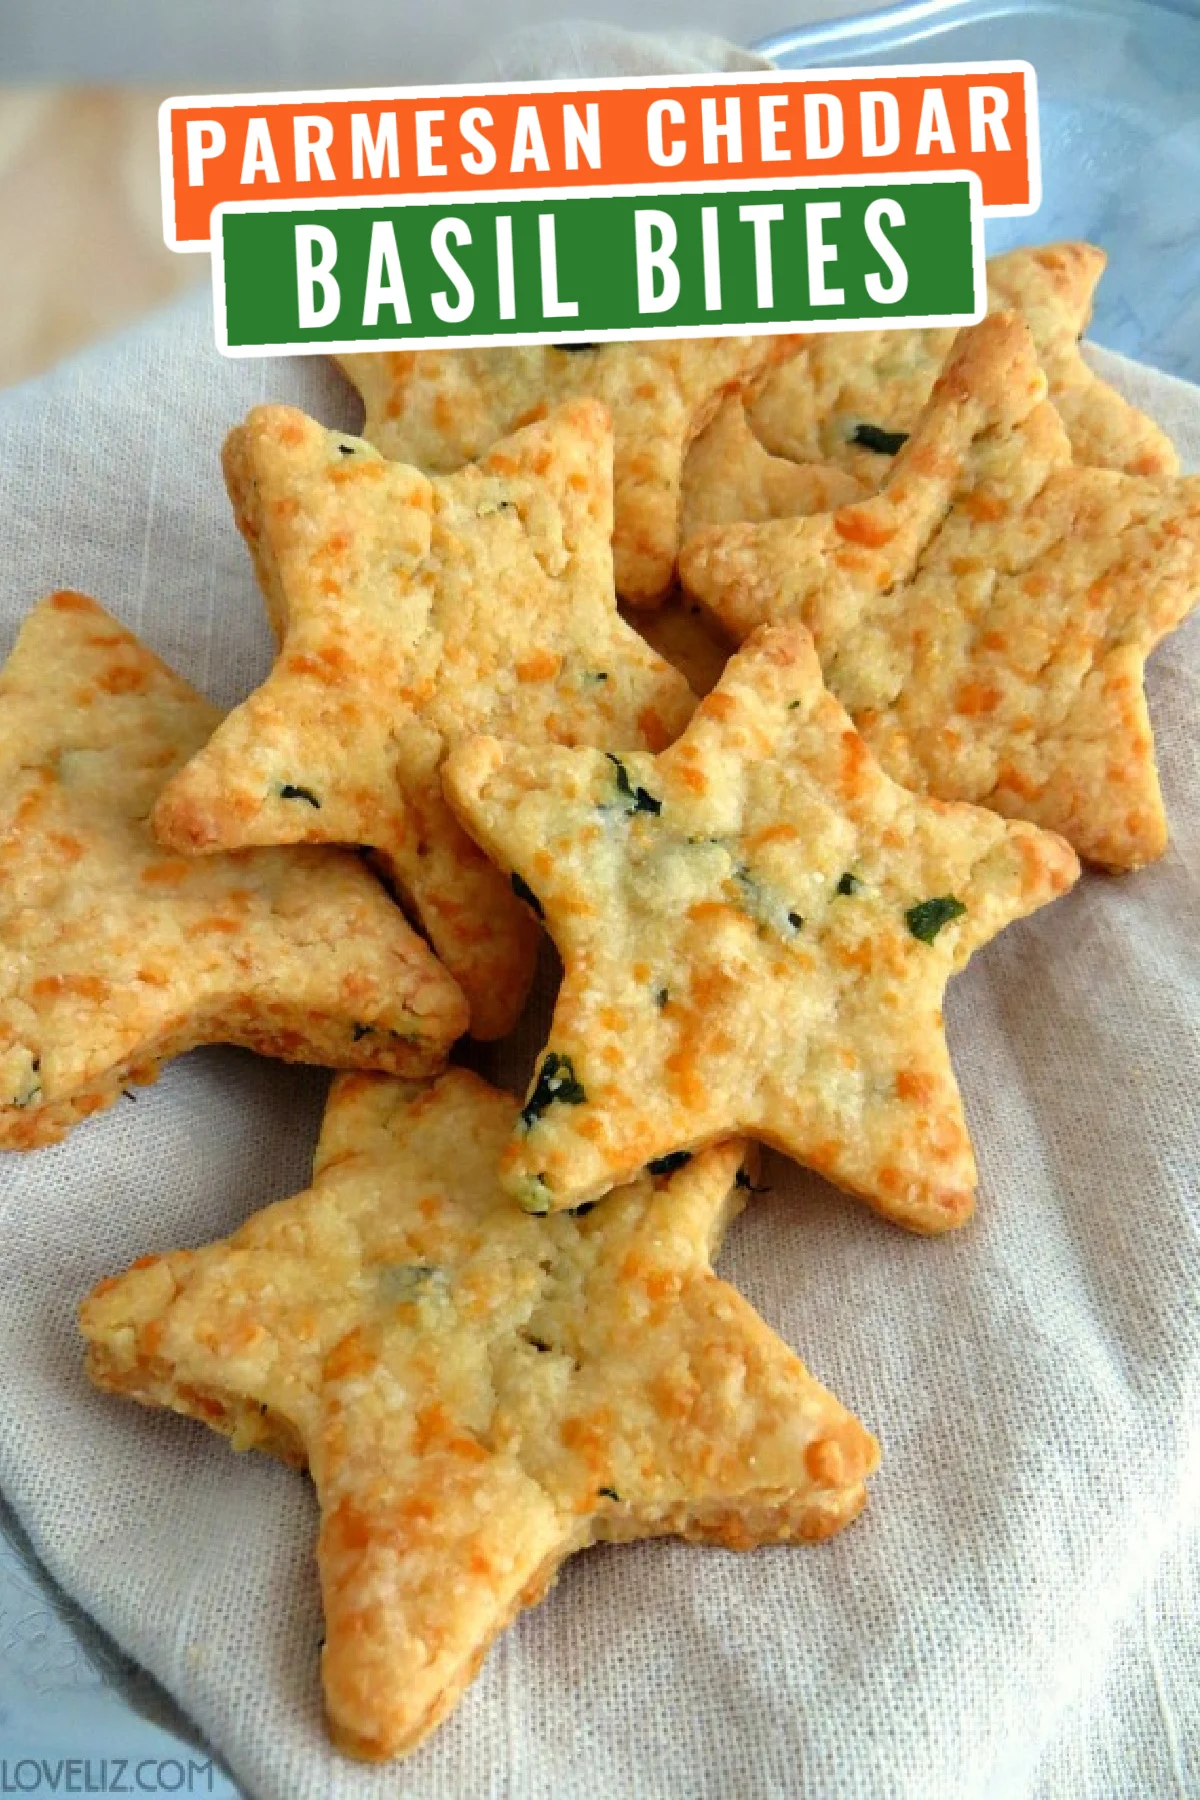 Parmesan Cheddar Basil Bites are a delicious appetizer perfect for any event or party! They are crisp outside but soft and tender inside.